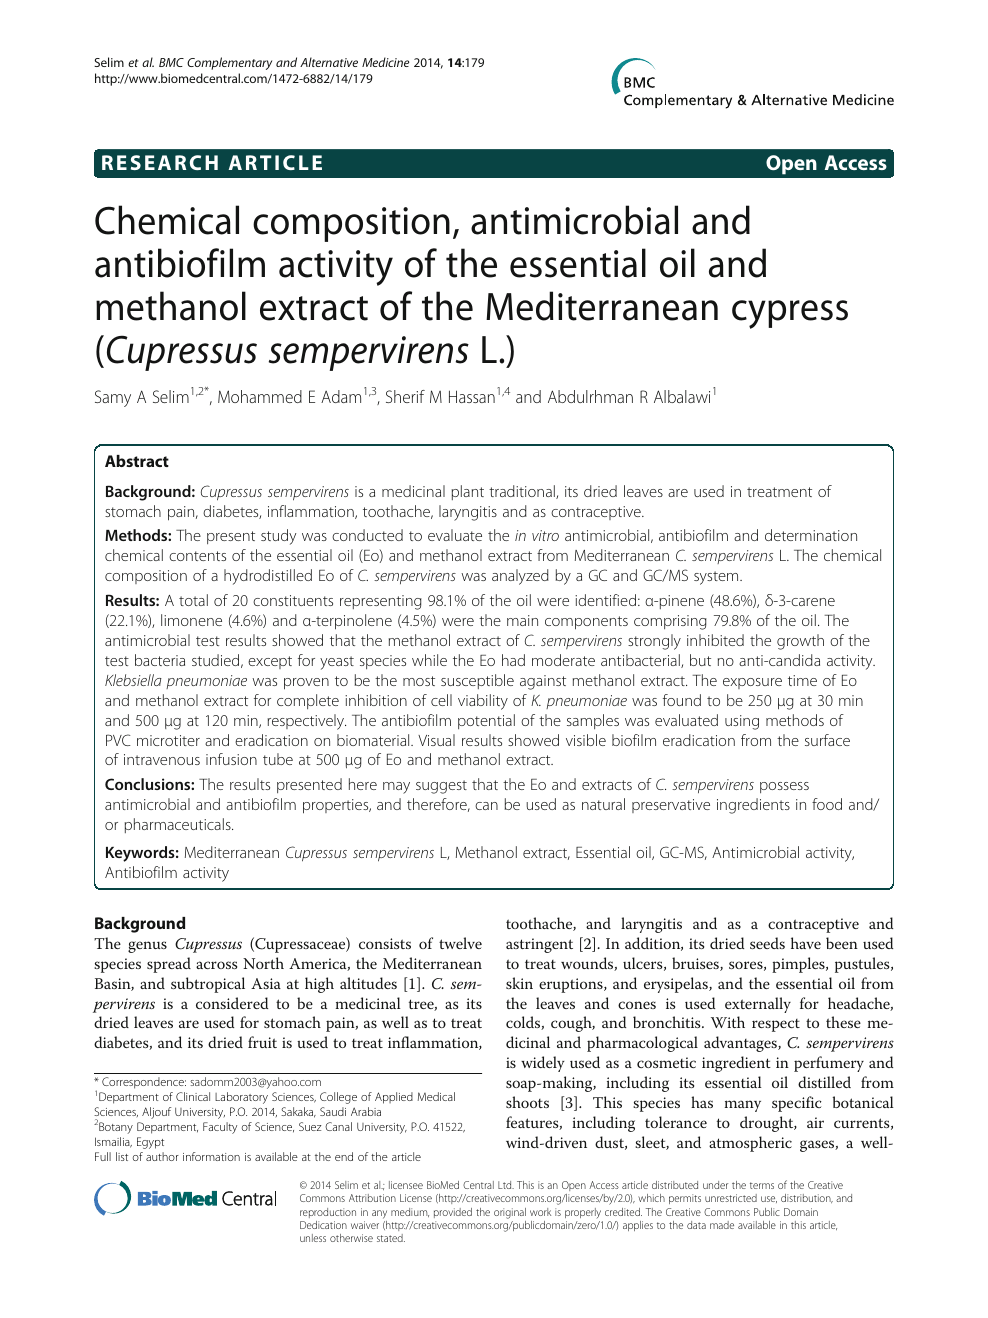 Chemical Composition and Biological Activity of the Essential Oil